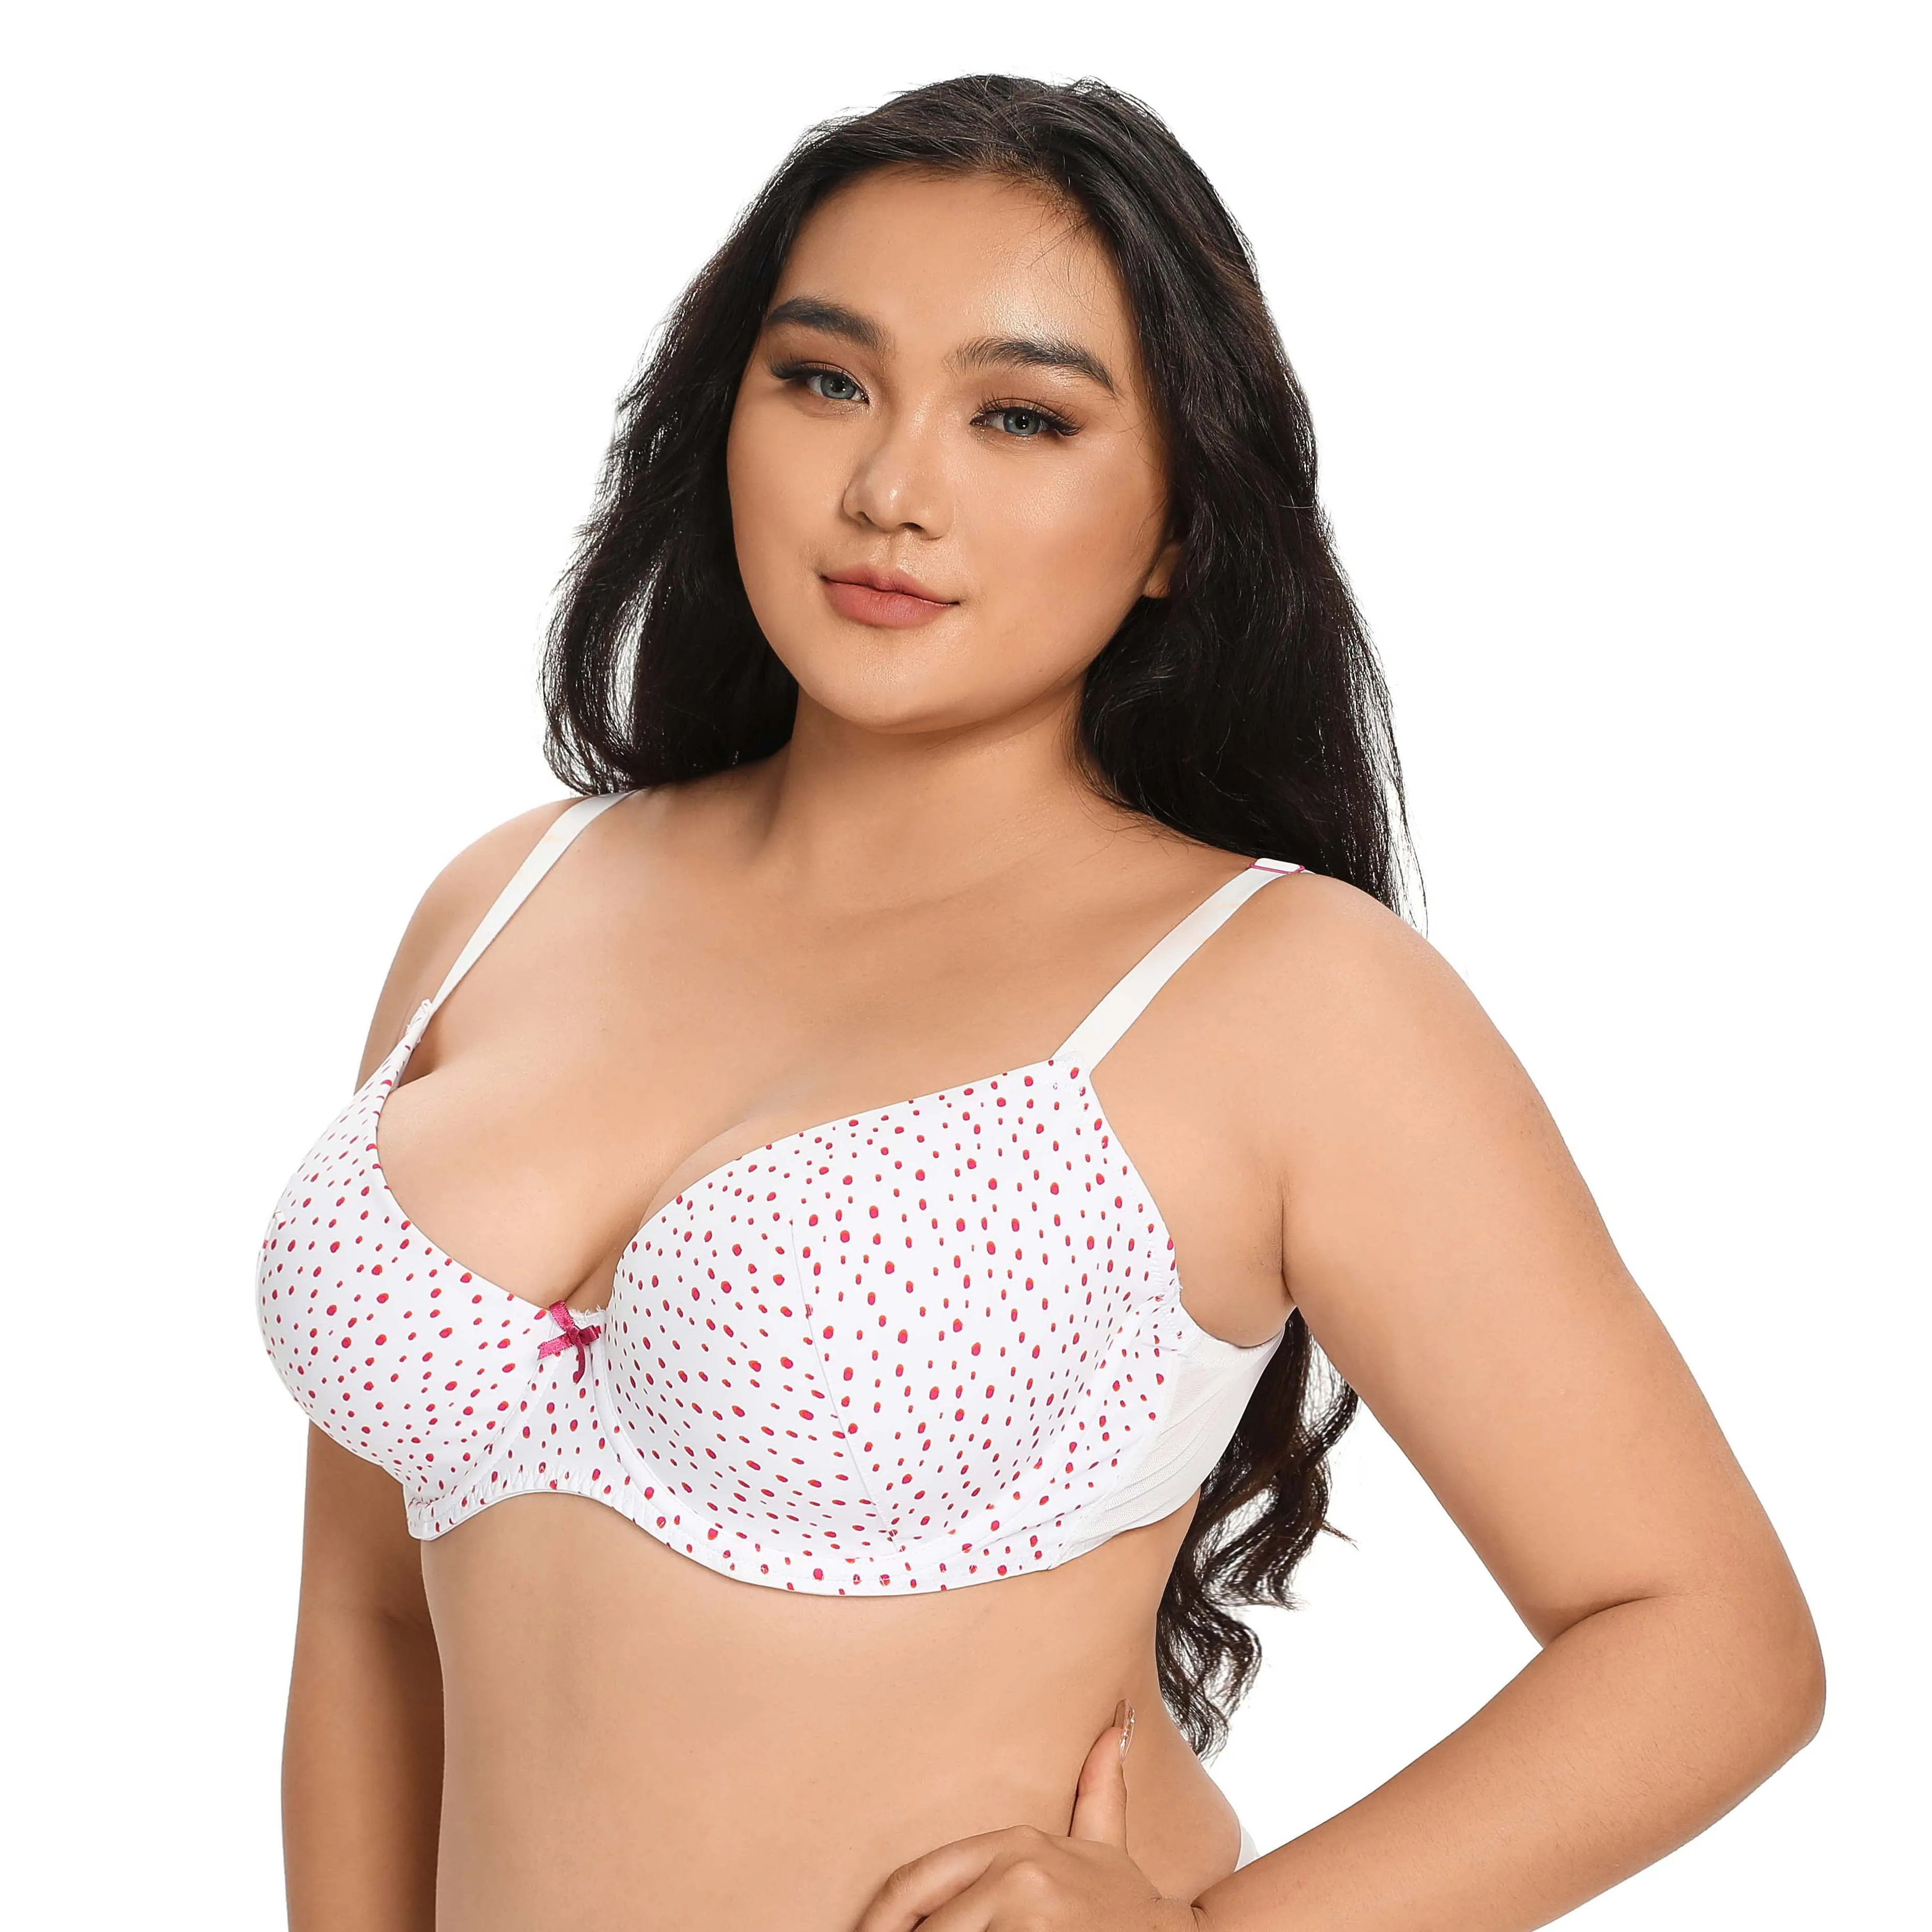 Woman Printed Bra Big Size Cup Plus Size Padded Up Bra Big Full Coverage Cups Underwire Plus Size Women Padded - Buy Plus Size Bra Push Up Padded Bra Big Size